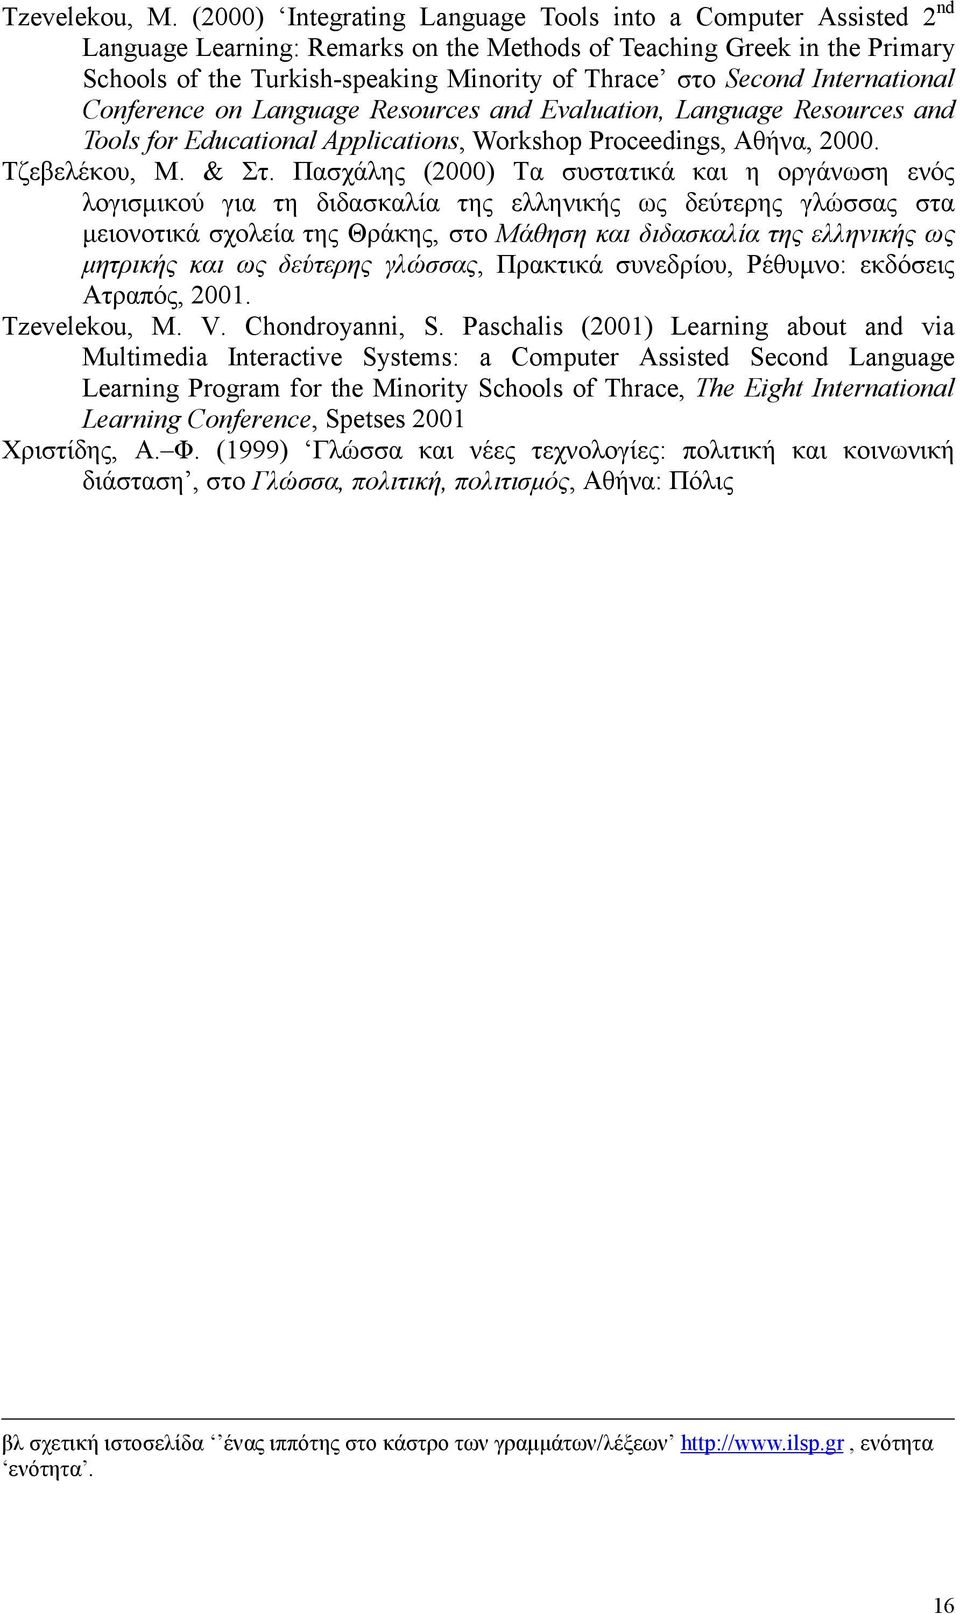 Second International Conference on Language Resources and Evaluation, Language Resources and Tools for Educational Applications, Workshop Proceedings, Αθήνα, 2000. Τζεβελέκου, Μ. & Στ.